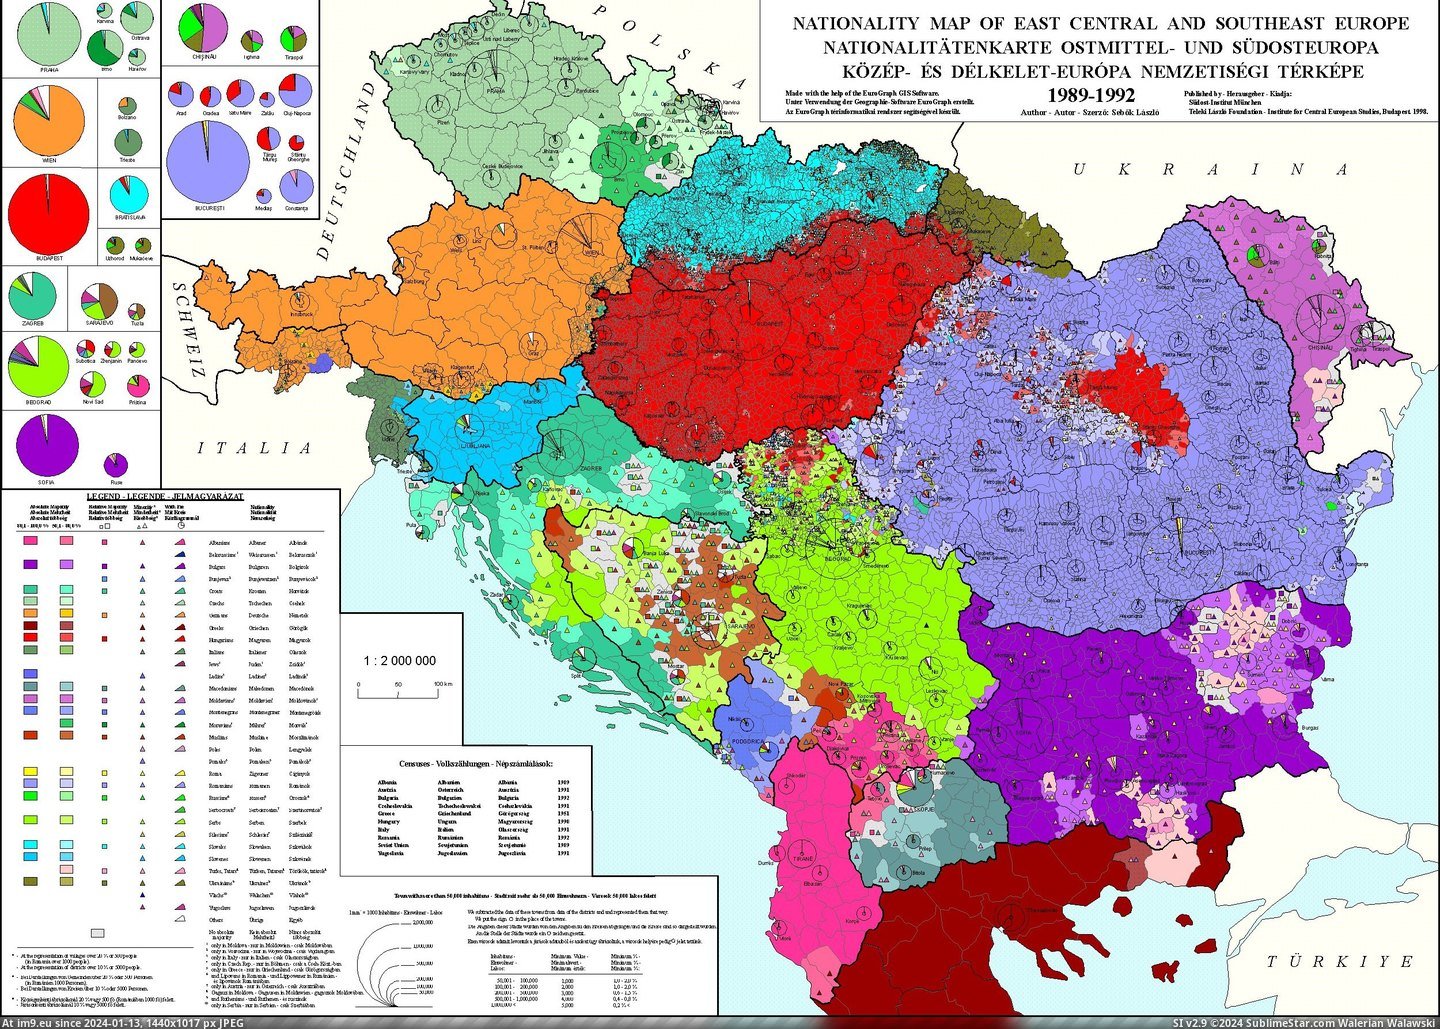 #Map #Europe #Nationality #Balkans #Southern #Central [Mapporn] Nationality Map of the Balkans and southern Central Europe [2500x1778] Pic. (Изображение из альбом My r/MAPS favs))